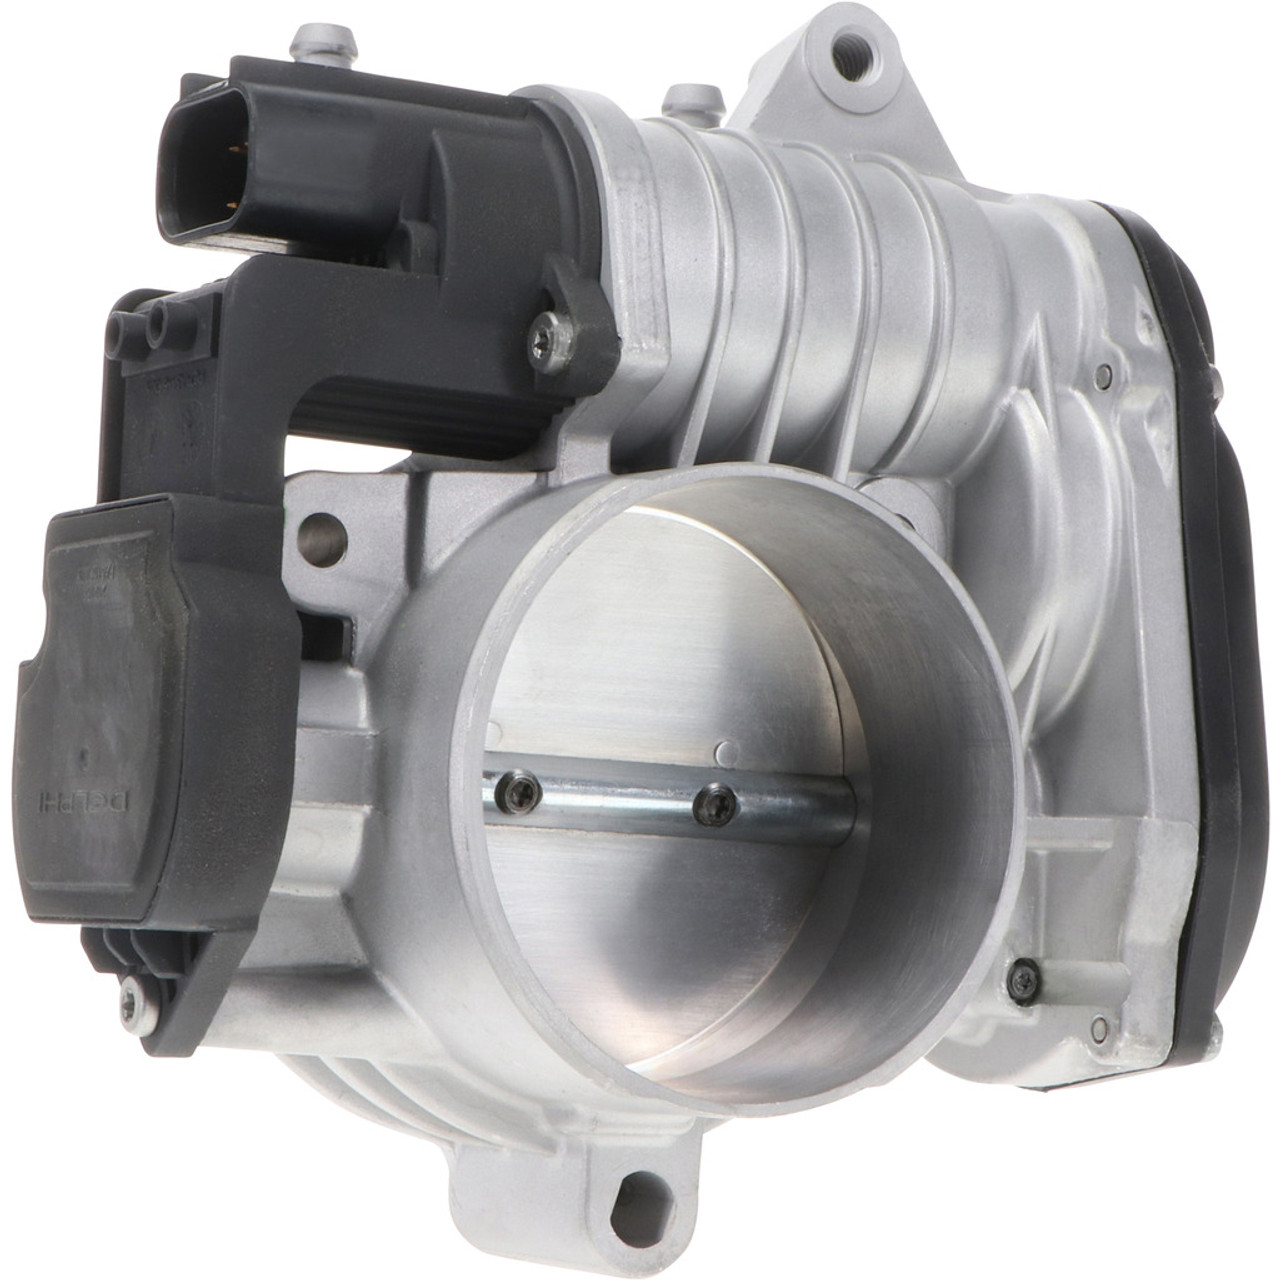 A Guide to Cleaning a Throttle Body -  Motors Blog